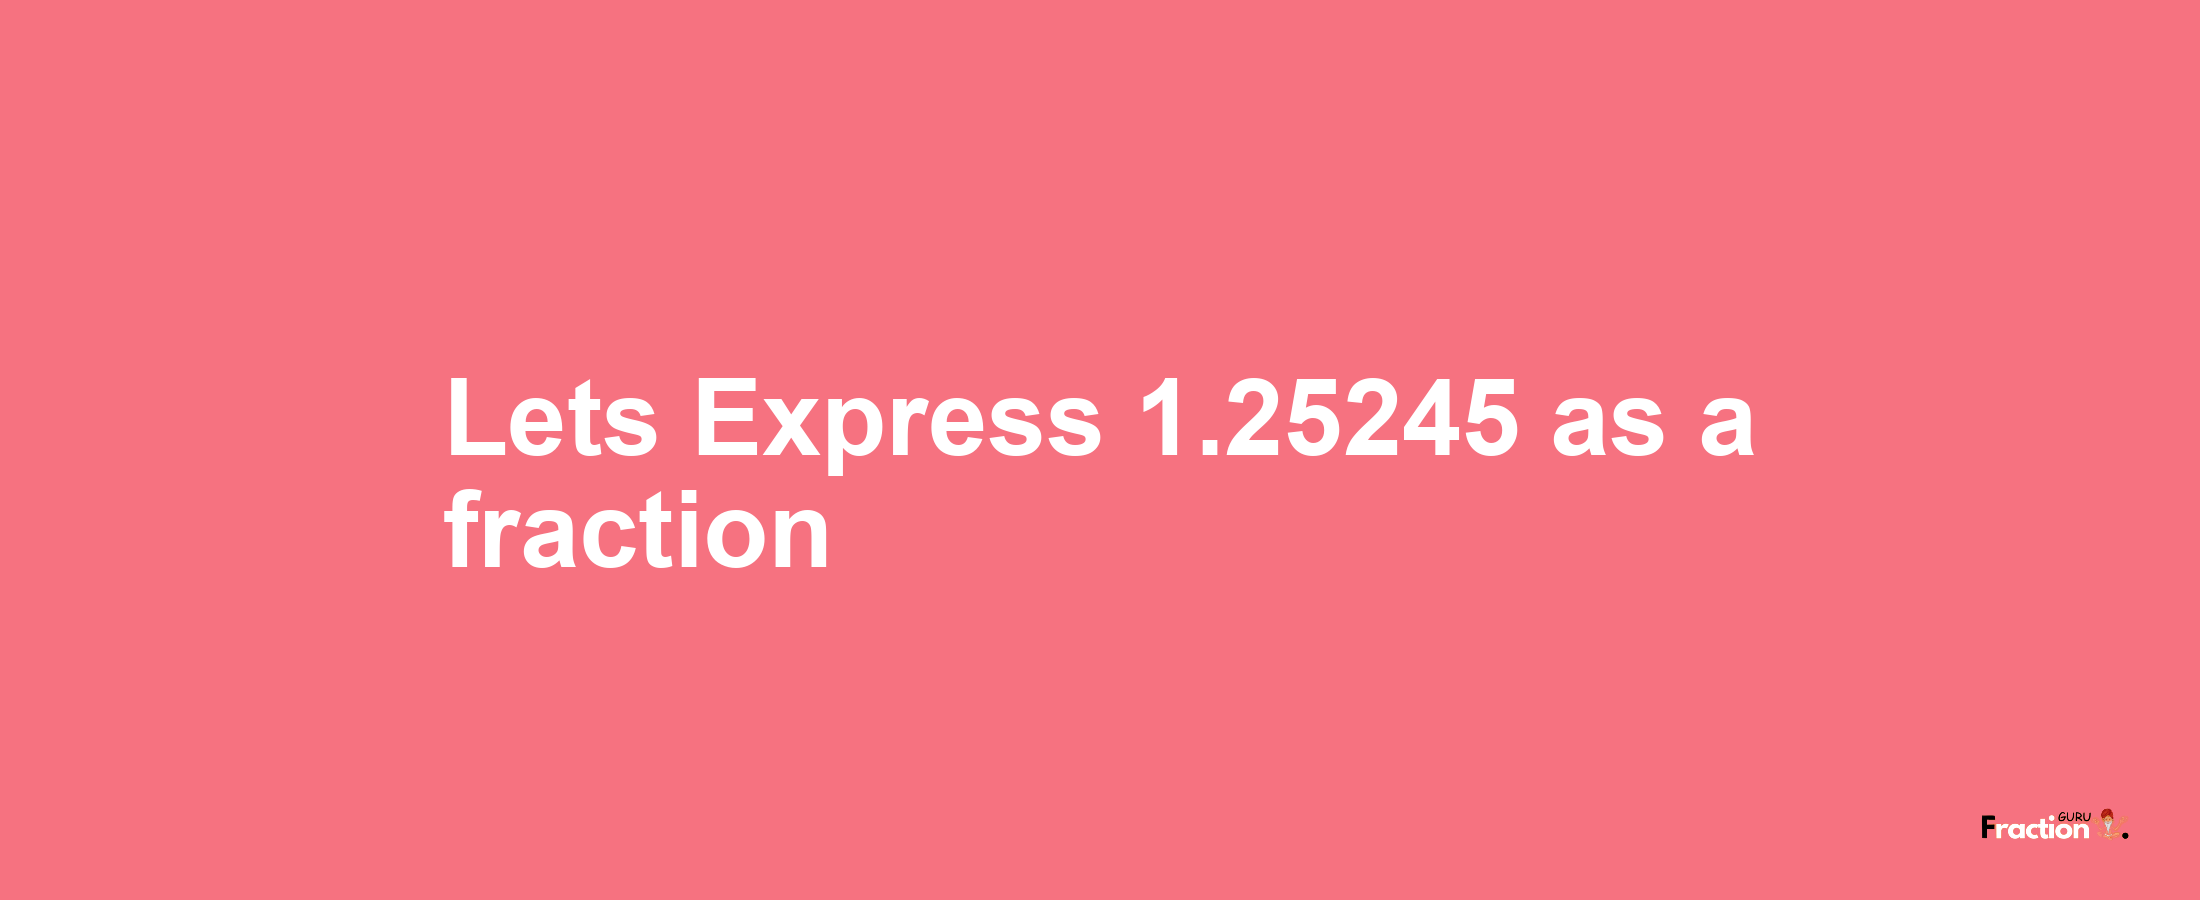 Lets Express 1.25245 as afraction